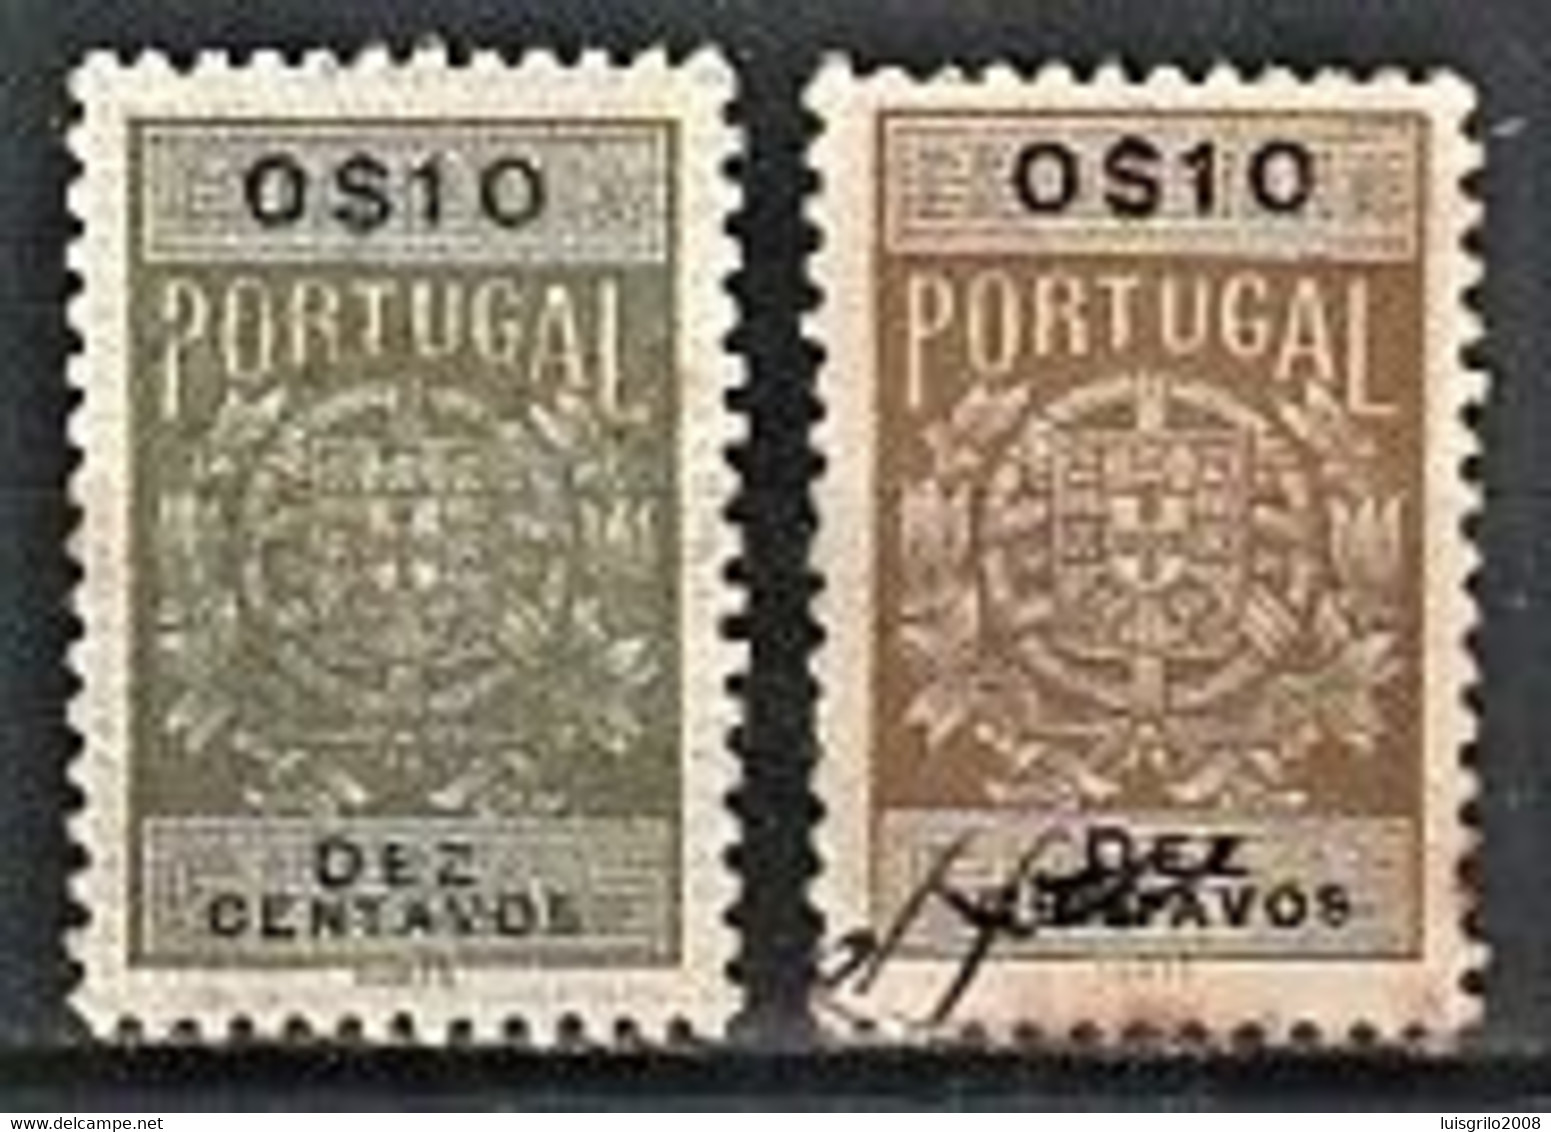 Fiscal/ Revenue, Portugal 1940 - Estampilha Fiscal -|- 0$10 - COLOR VARIANT - Is The Stamp Of The Right - Gebraucht